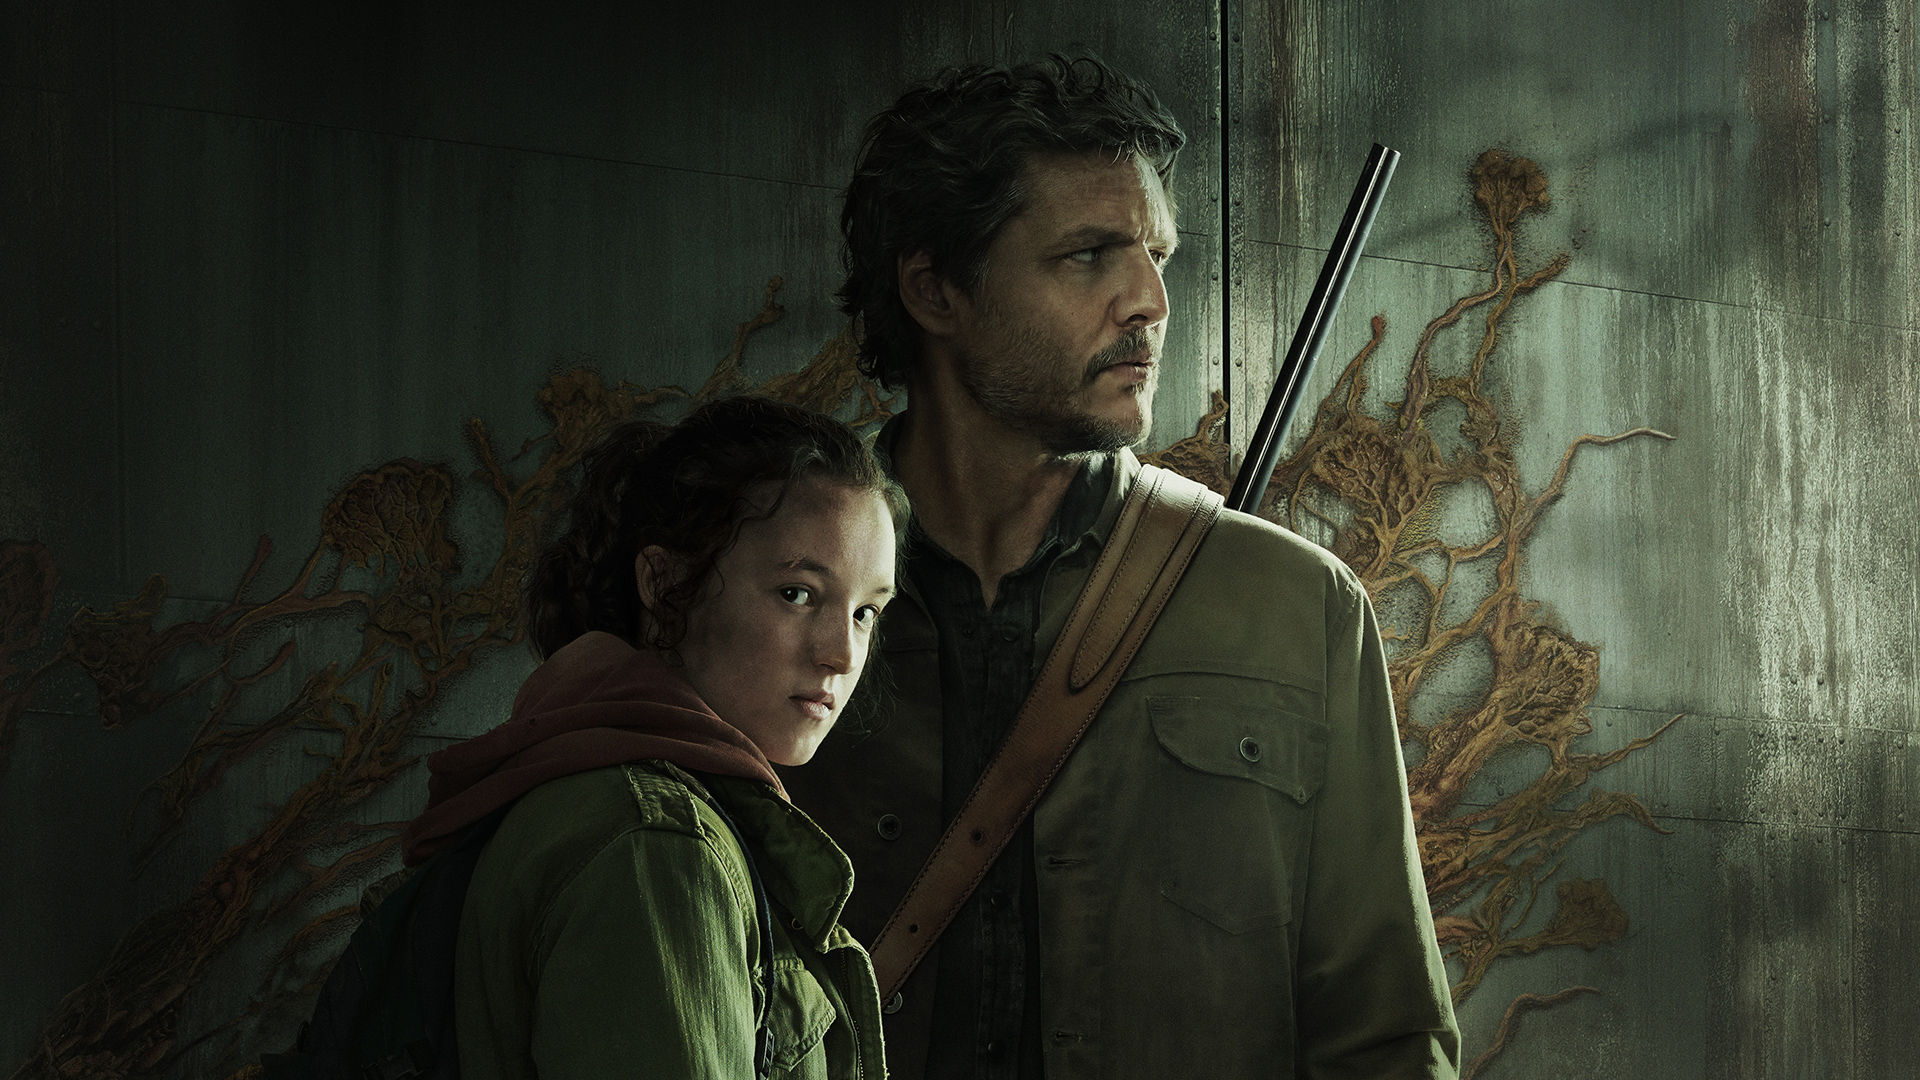 Ellie Belli Ramsey and Joel Pedro Pascala look in different directions in The Last of Us promotional image